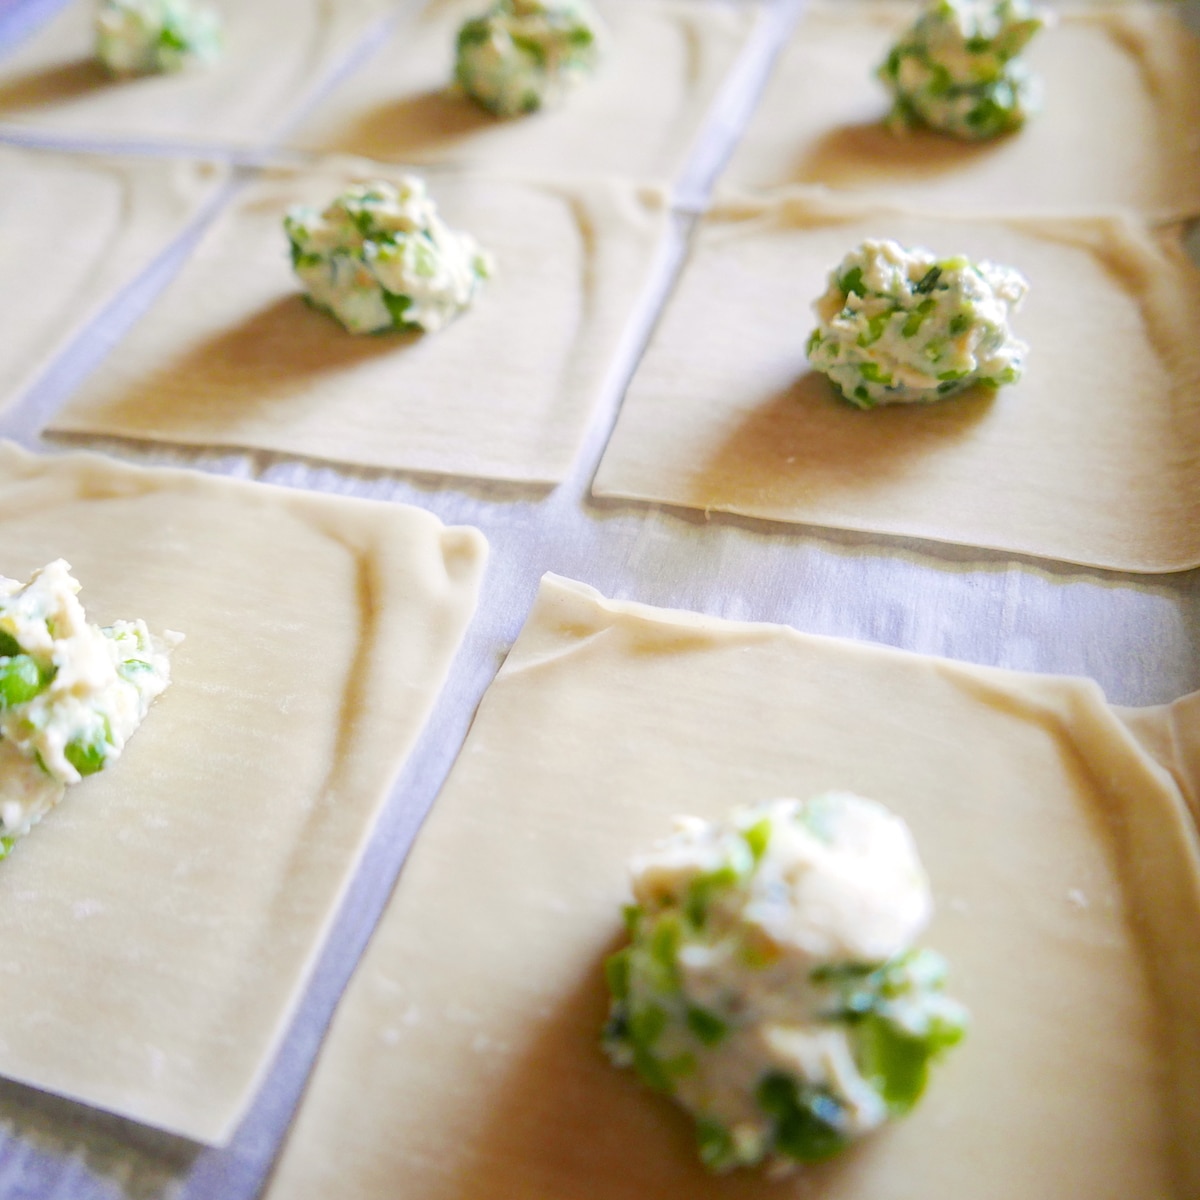 wonton wrappers being prepped with spring pea ricotta filling on a baking sheet.